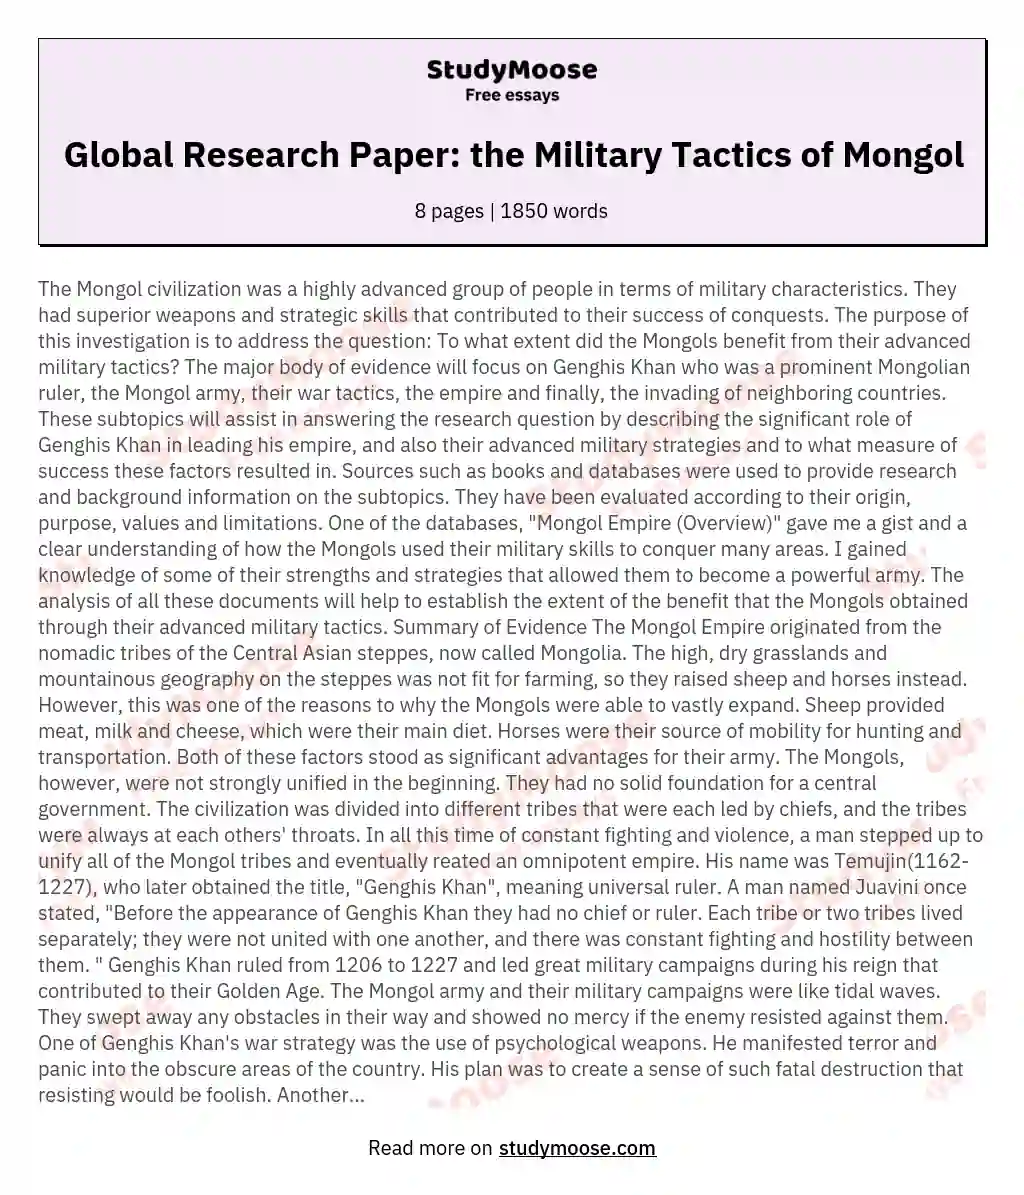 Global Research Paper: the Military Tactics of Mongol essay